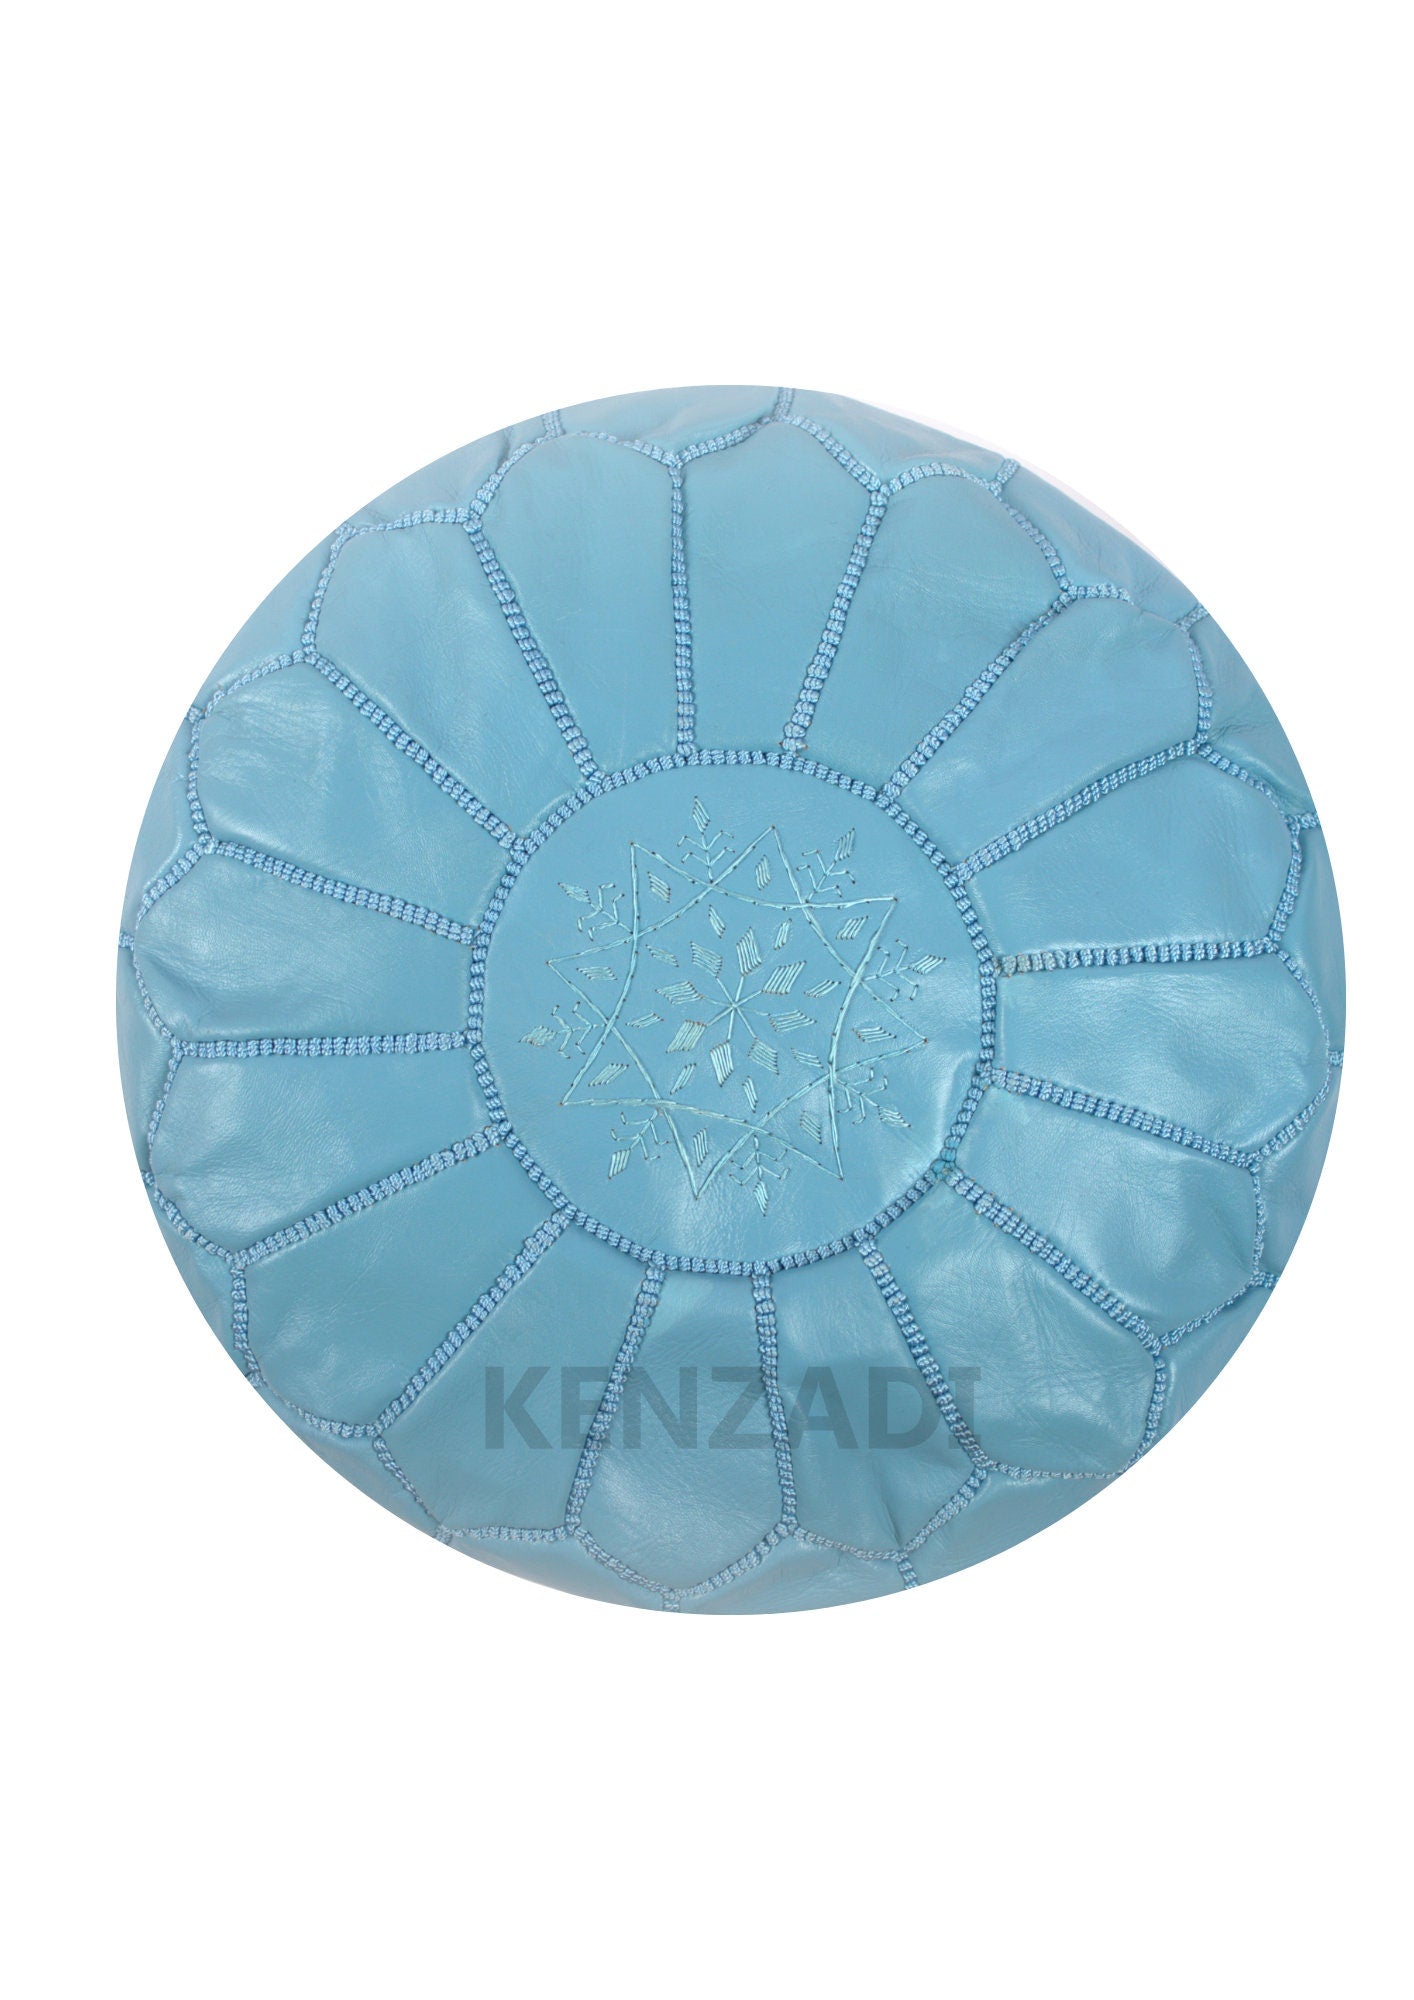 Handmade Moroccan round leather pouf with light blue embroidery - perfect for adding a bohemian touch to your décor